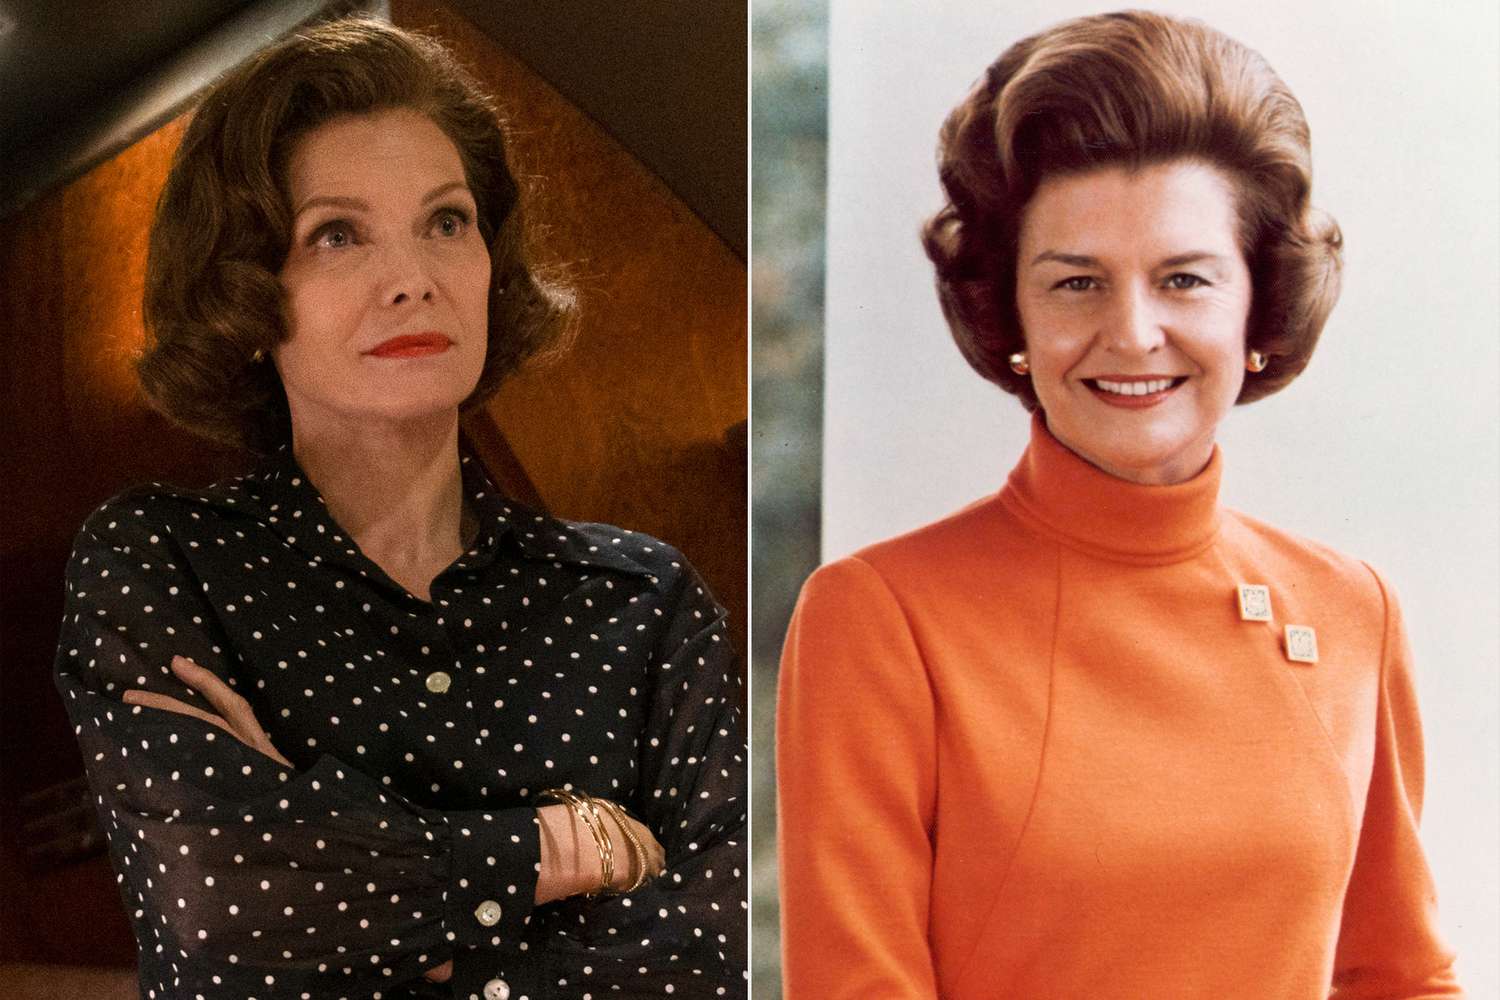 Michelle Pfeiffer as Betty Ford in The First Lady; Betty Ford in 1976